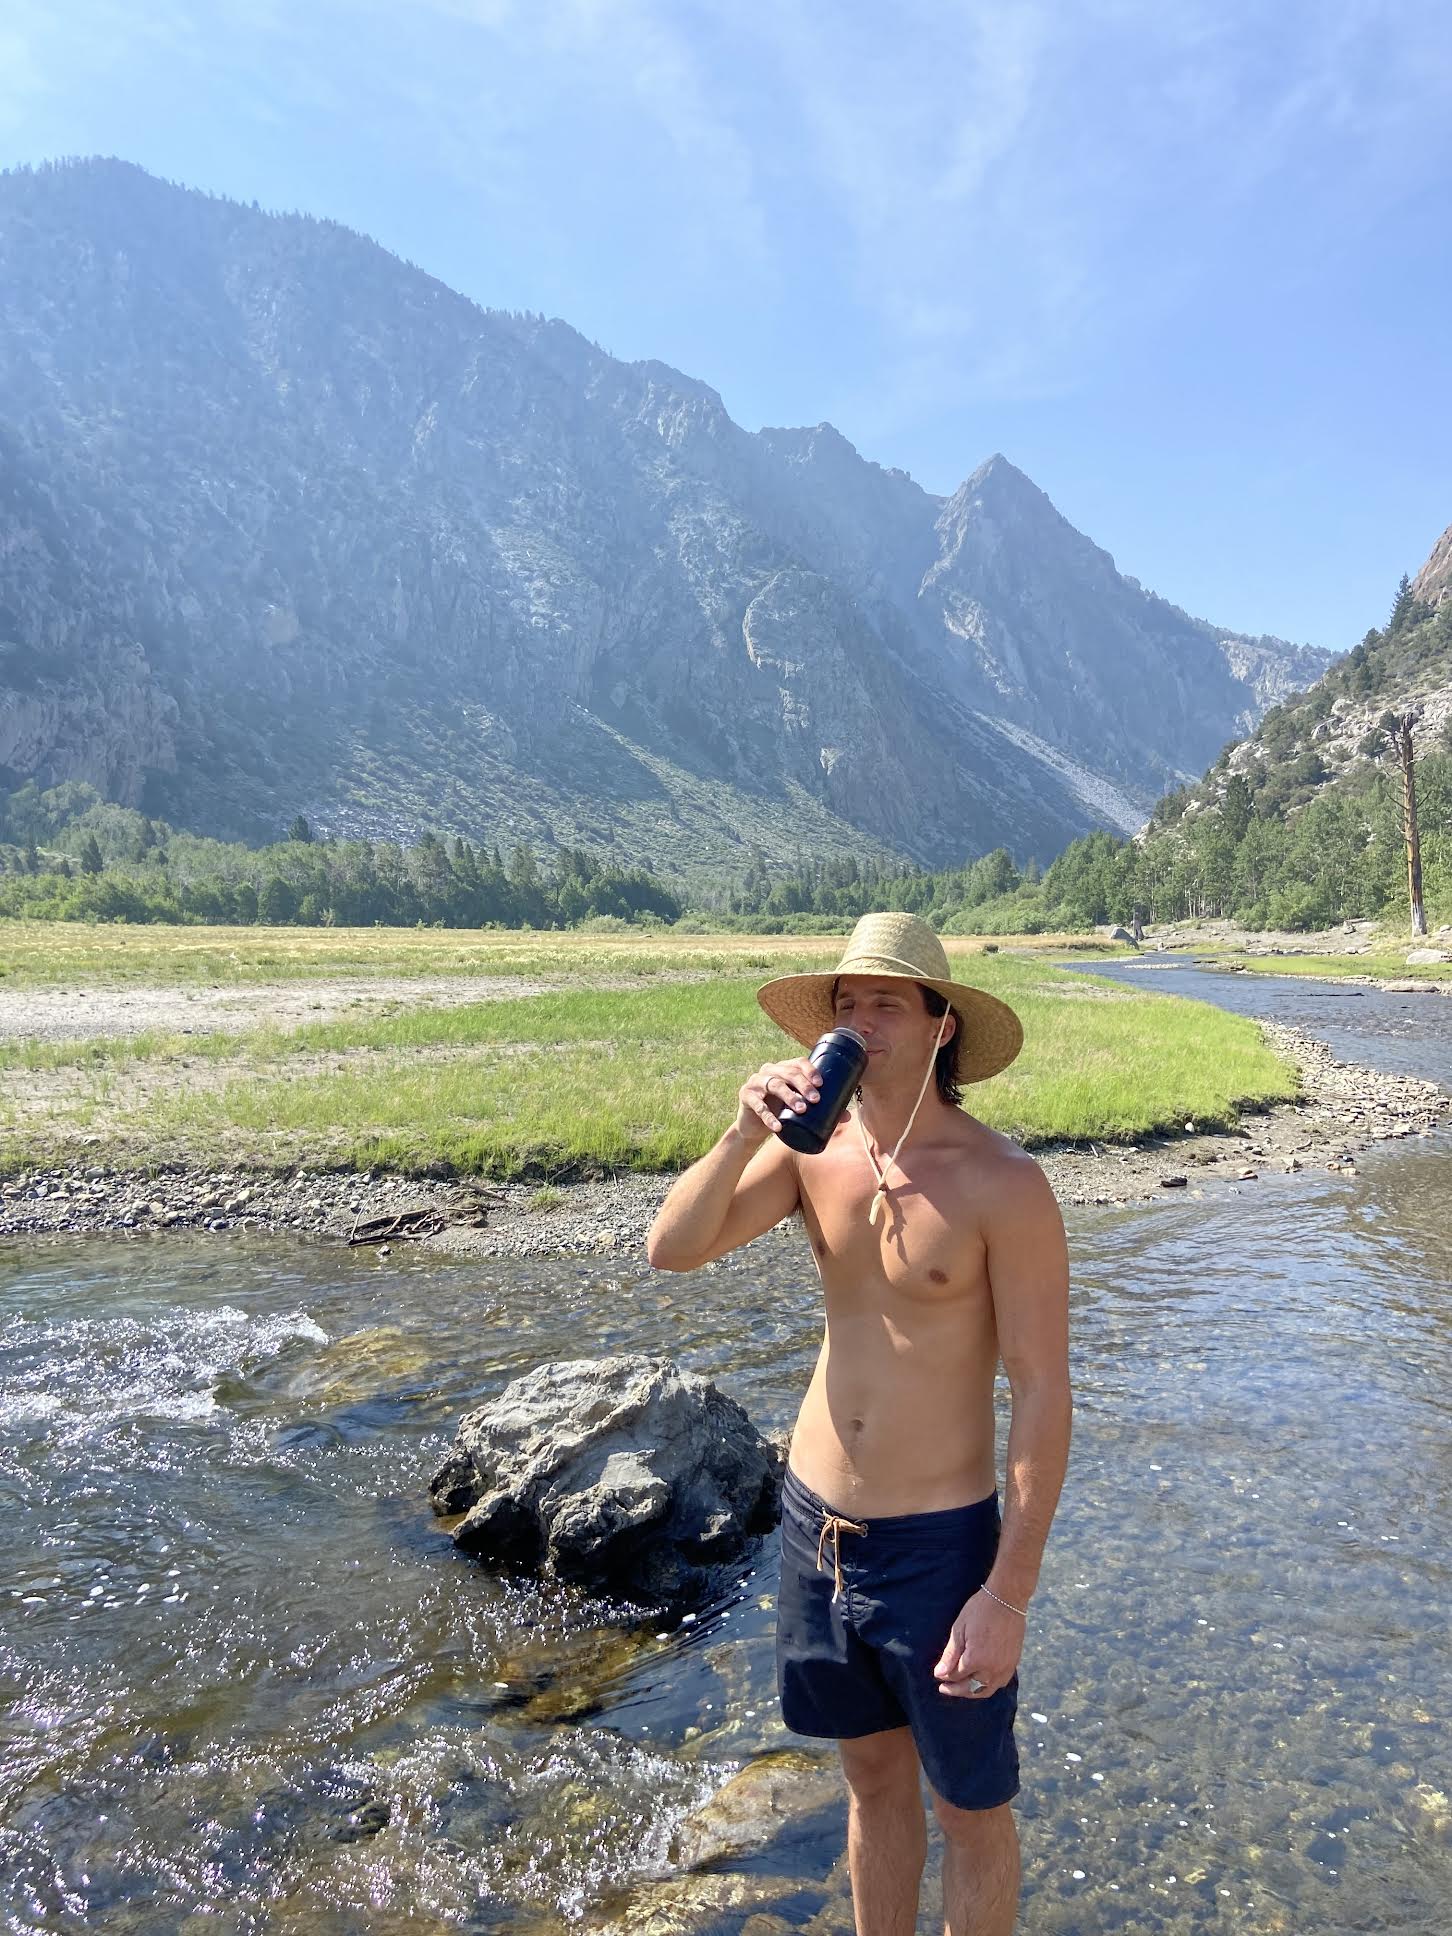 A male model wearing a straw hat while drinking a can cooler outside in front of a mountain view